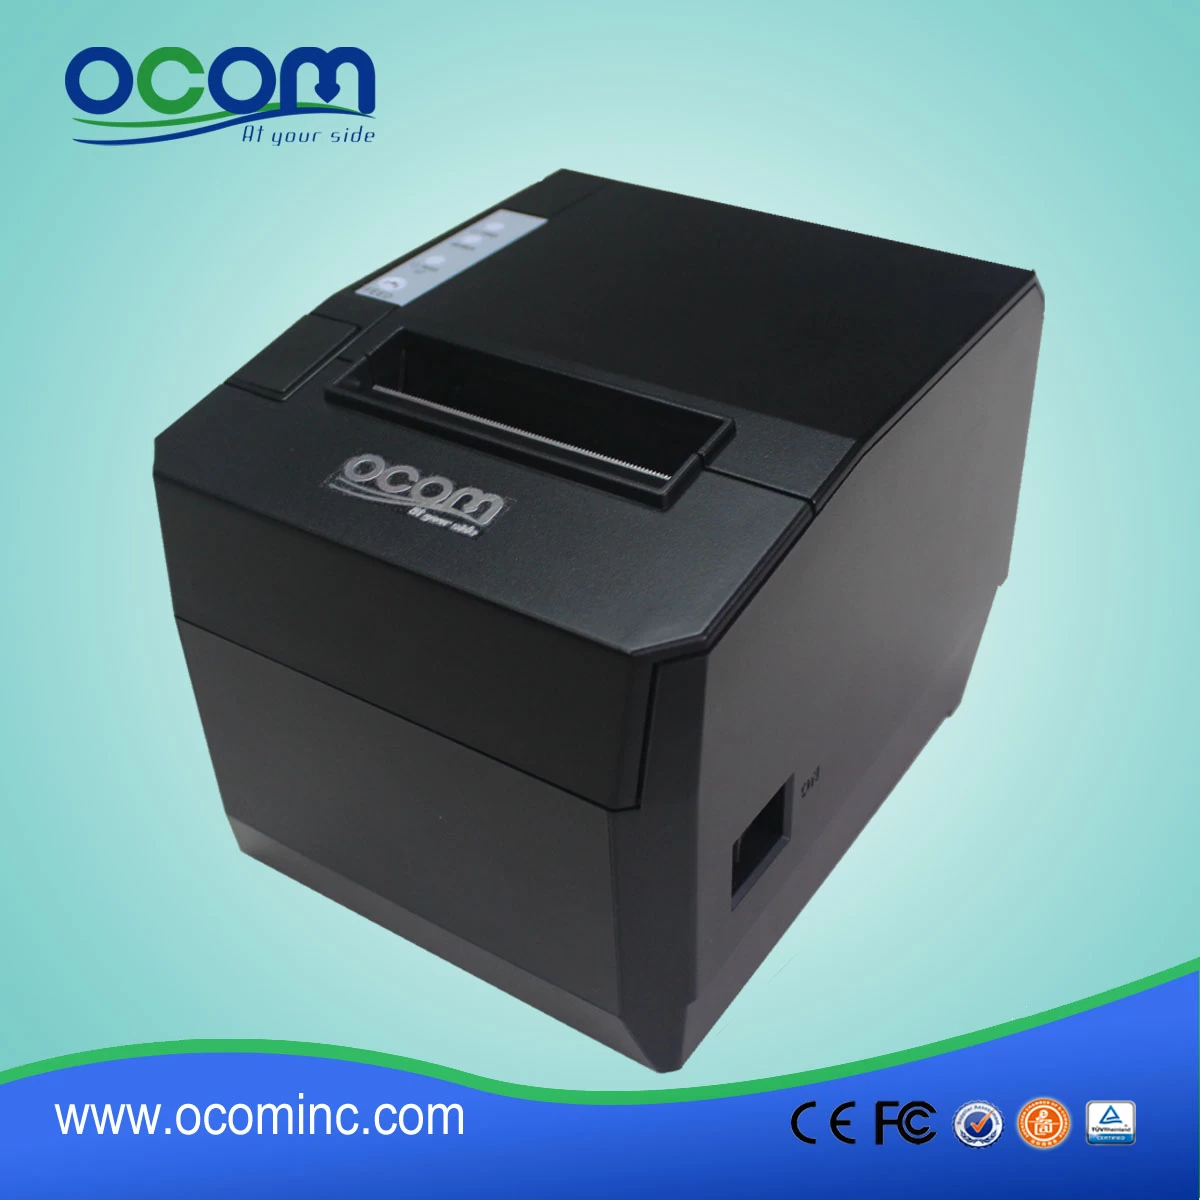 NEW! POS Thermal Printer 80mm with Auto Cutter Manufacturer